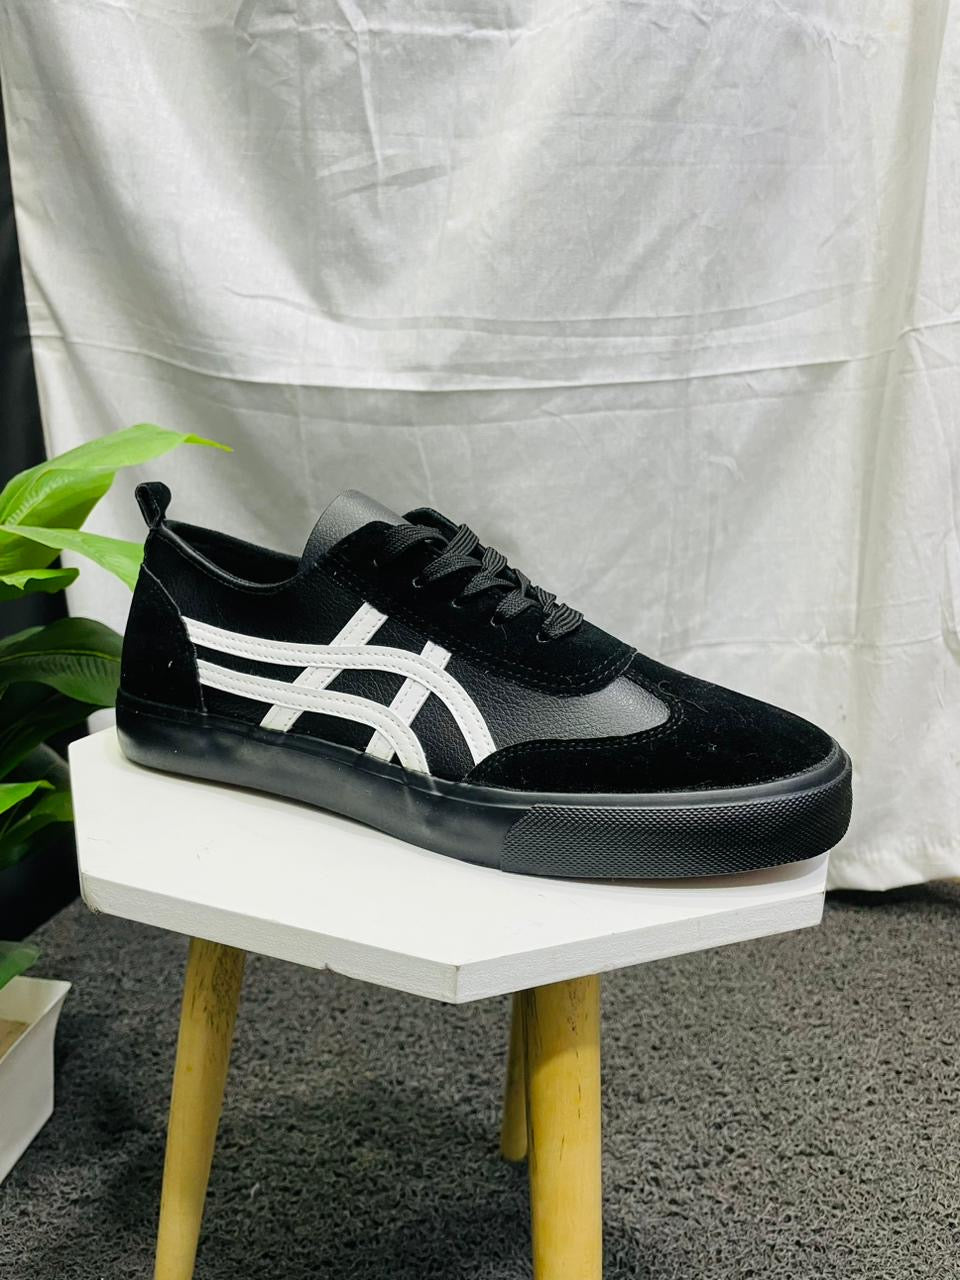 New Black Sneakers With White Stripes Canvas Shoes